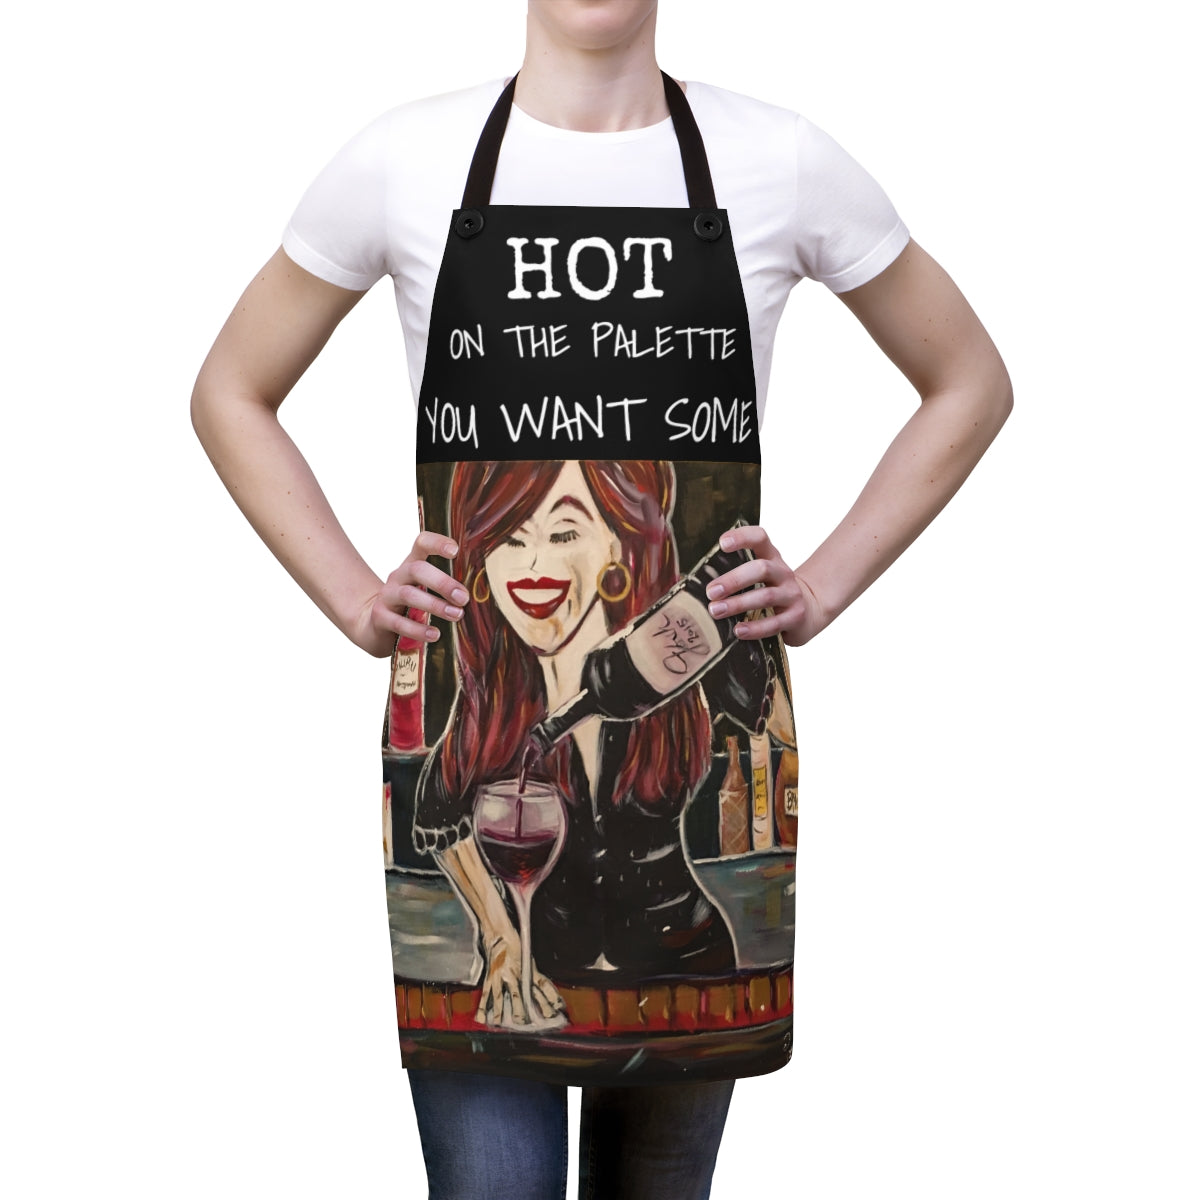 HOT on the Palette, You Want Some  Sexy Bartender   Kitchen Apron